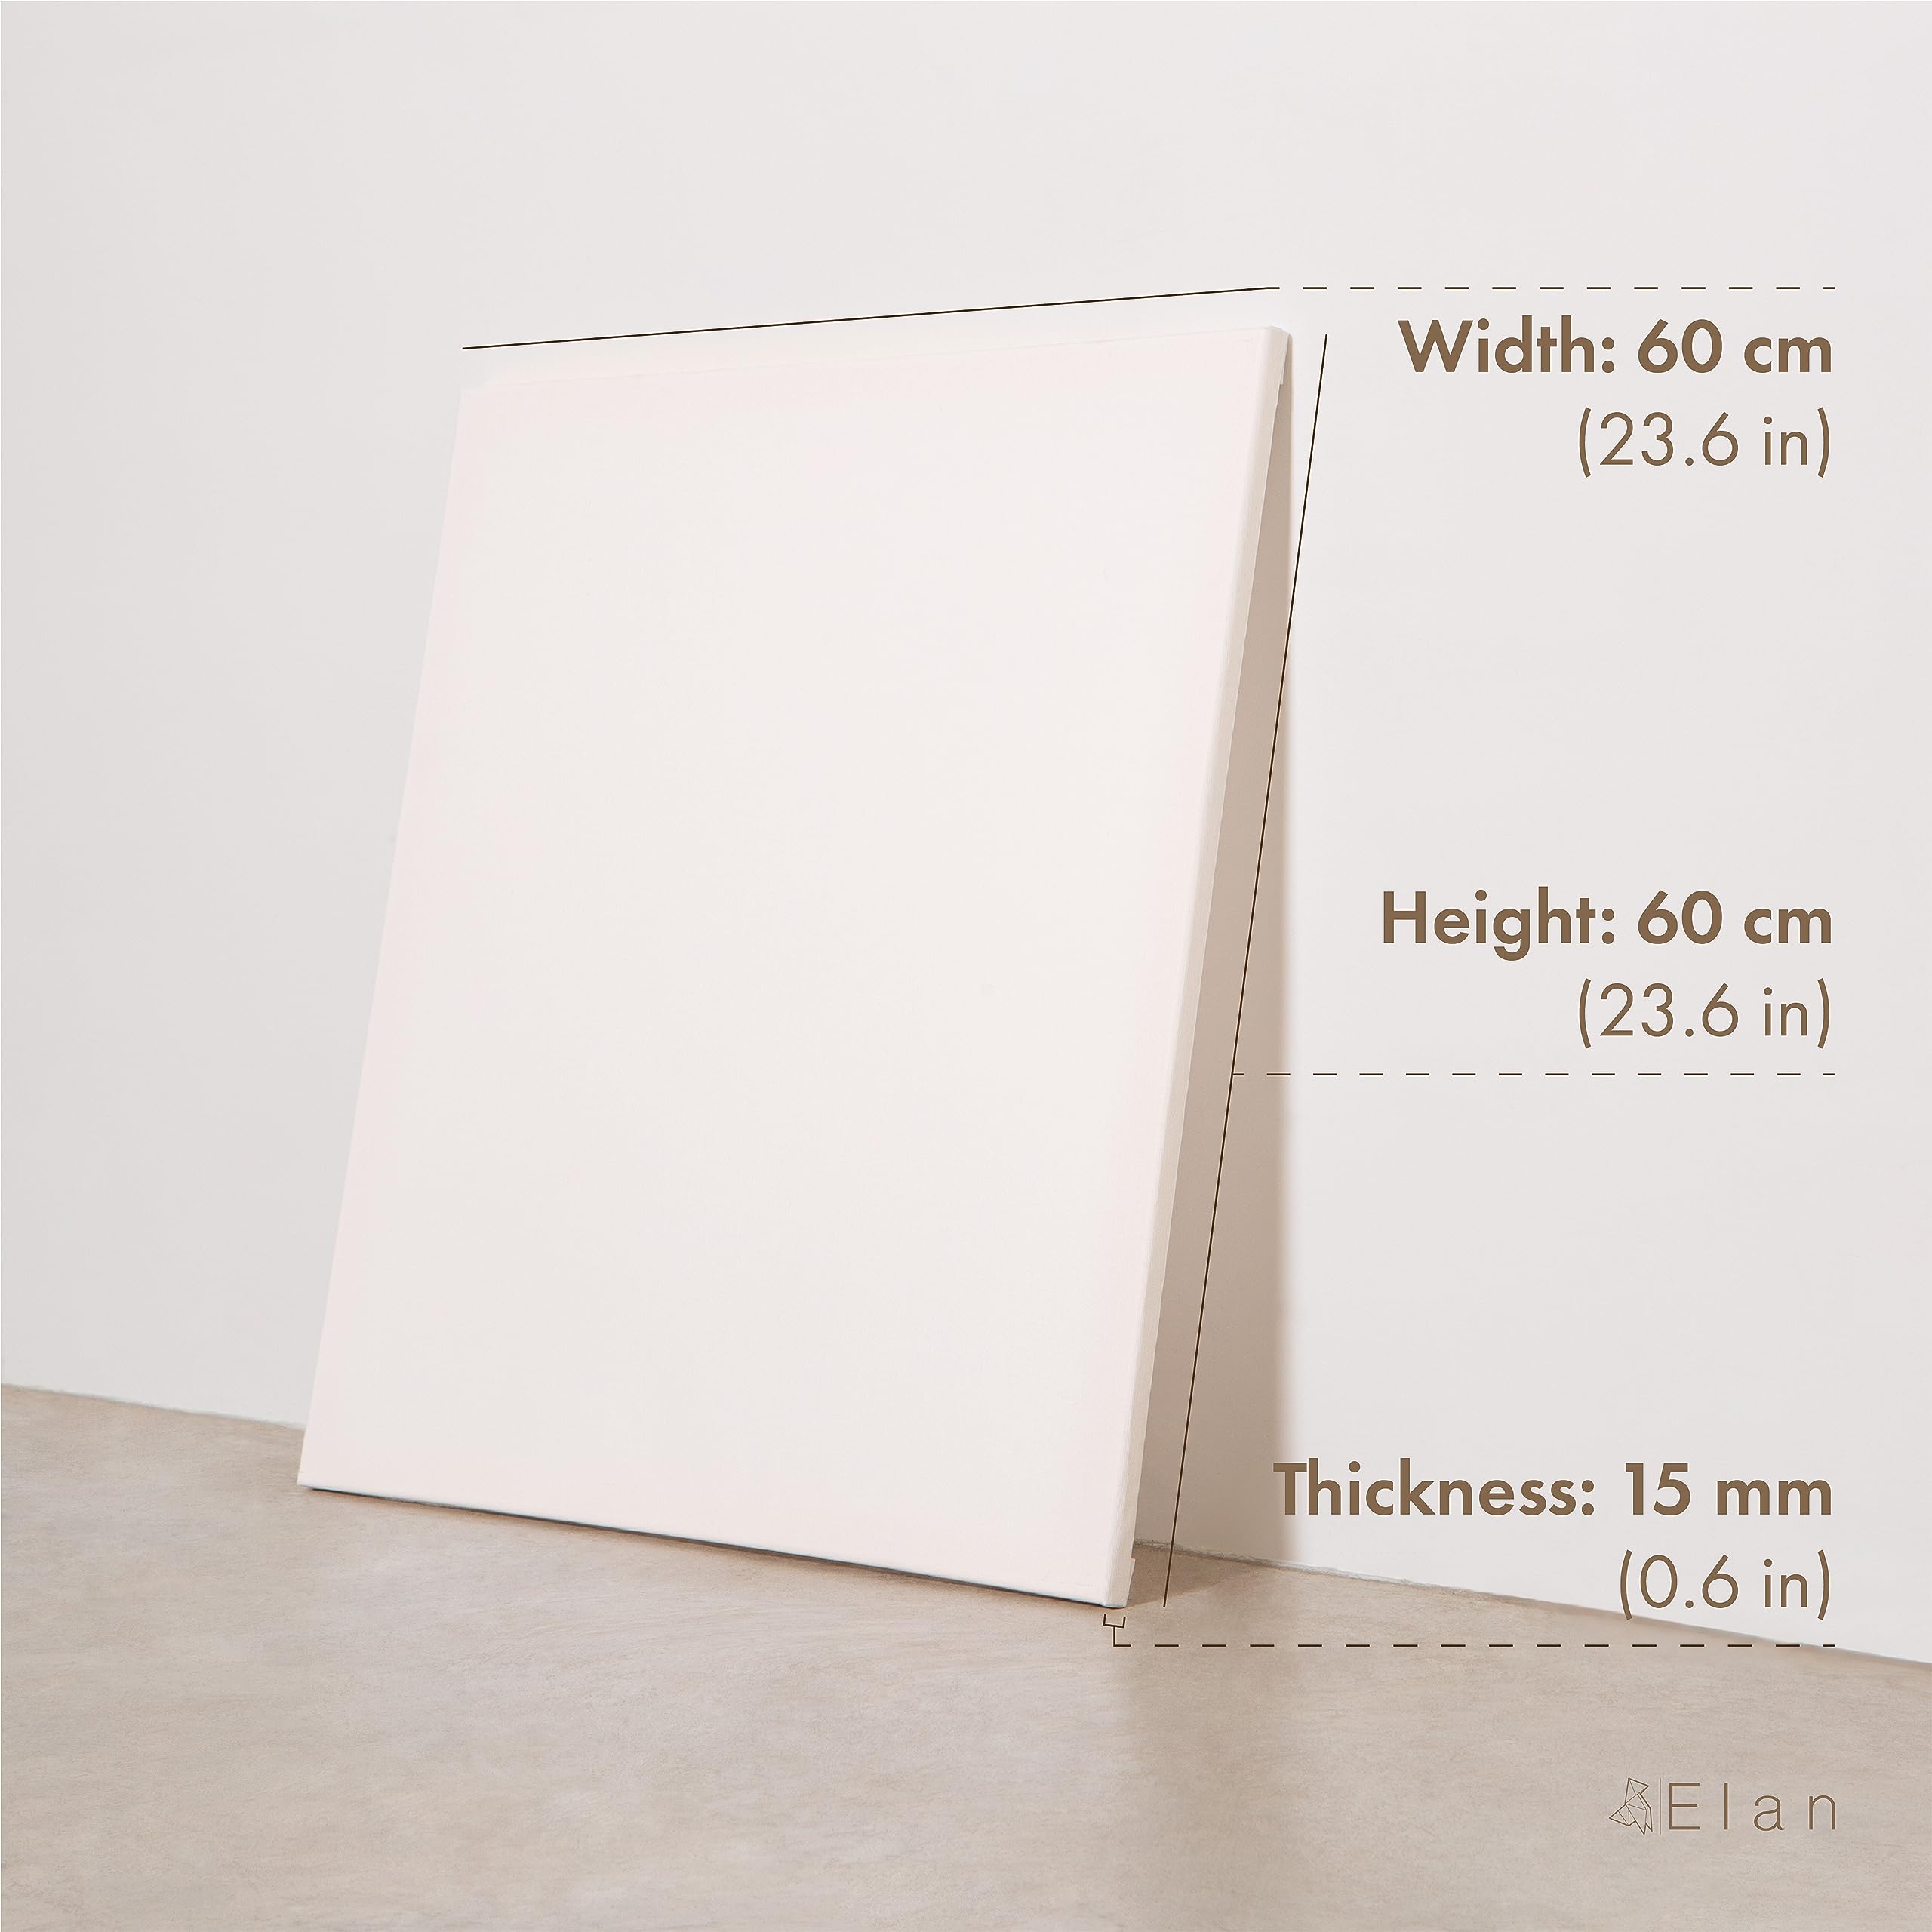 Elan Stretched Canvases 24x24, 4-Pack Canvases for Painting, Painting Canvas Bulk, Stretched Canvas for Adults Blank Canvas for Painting, Painting Canvases Paint Canvases for Painting Art Canvas